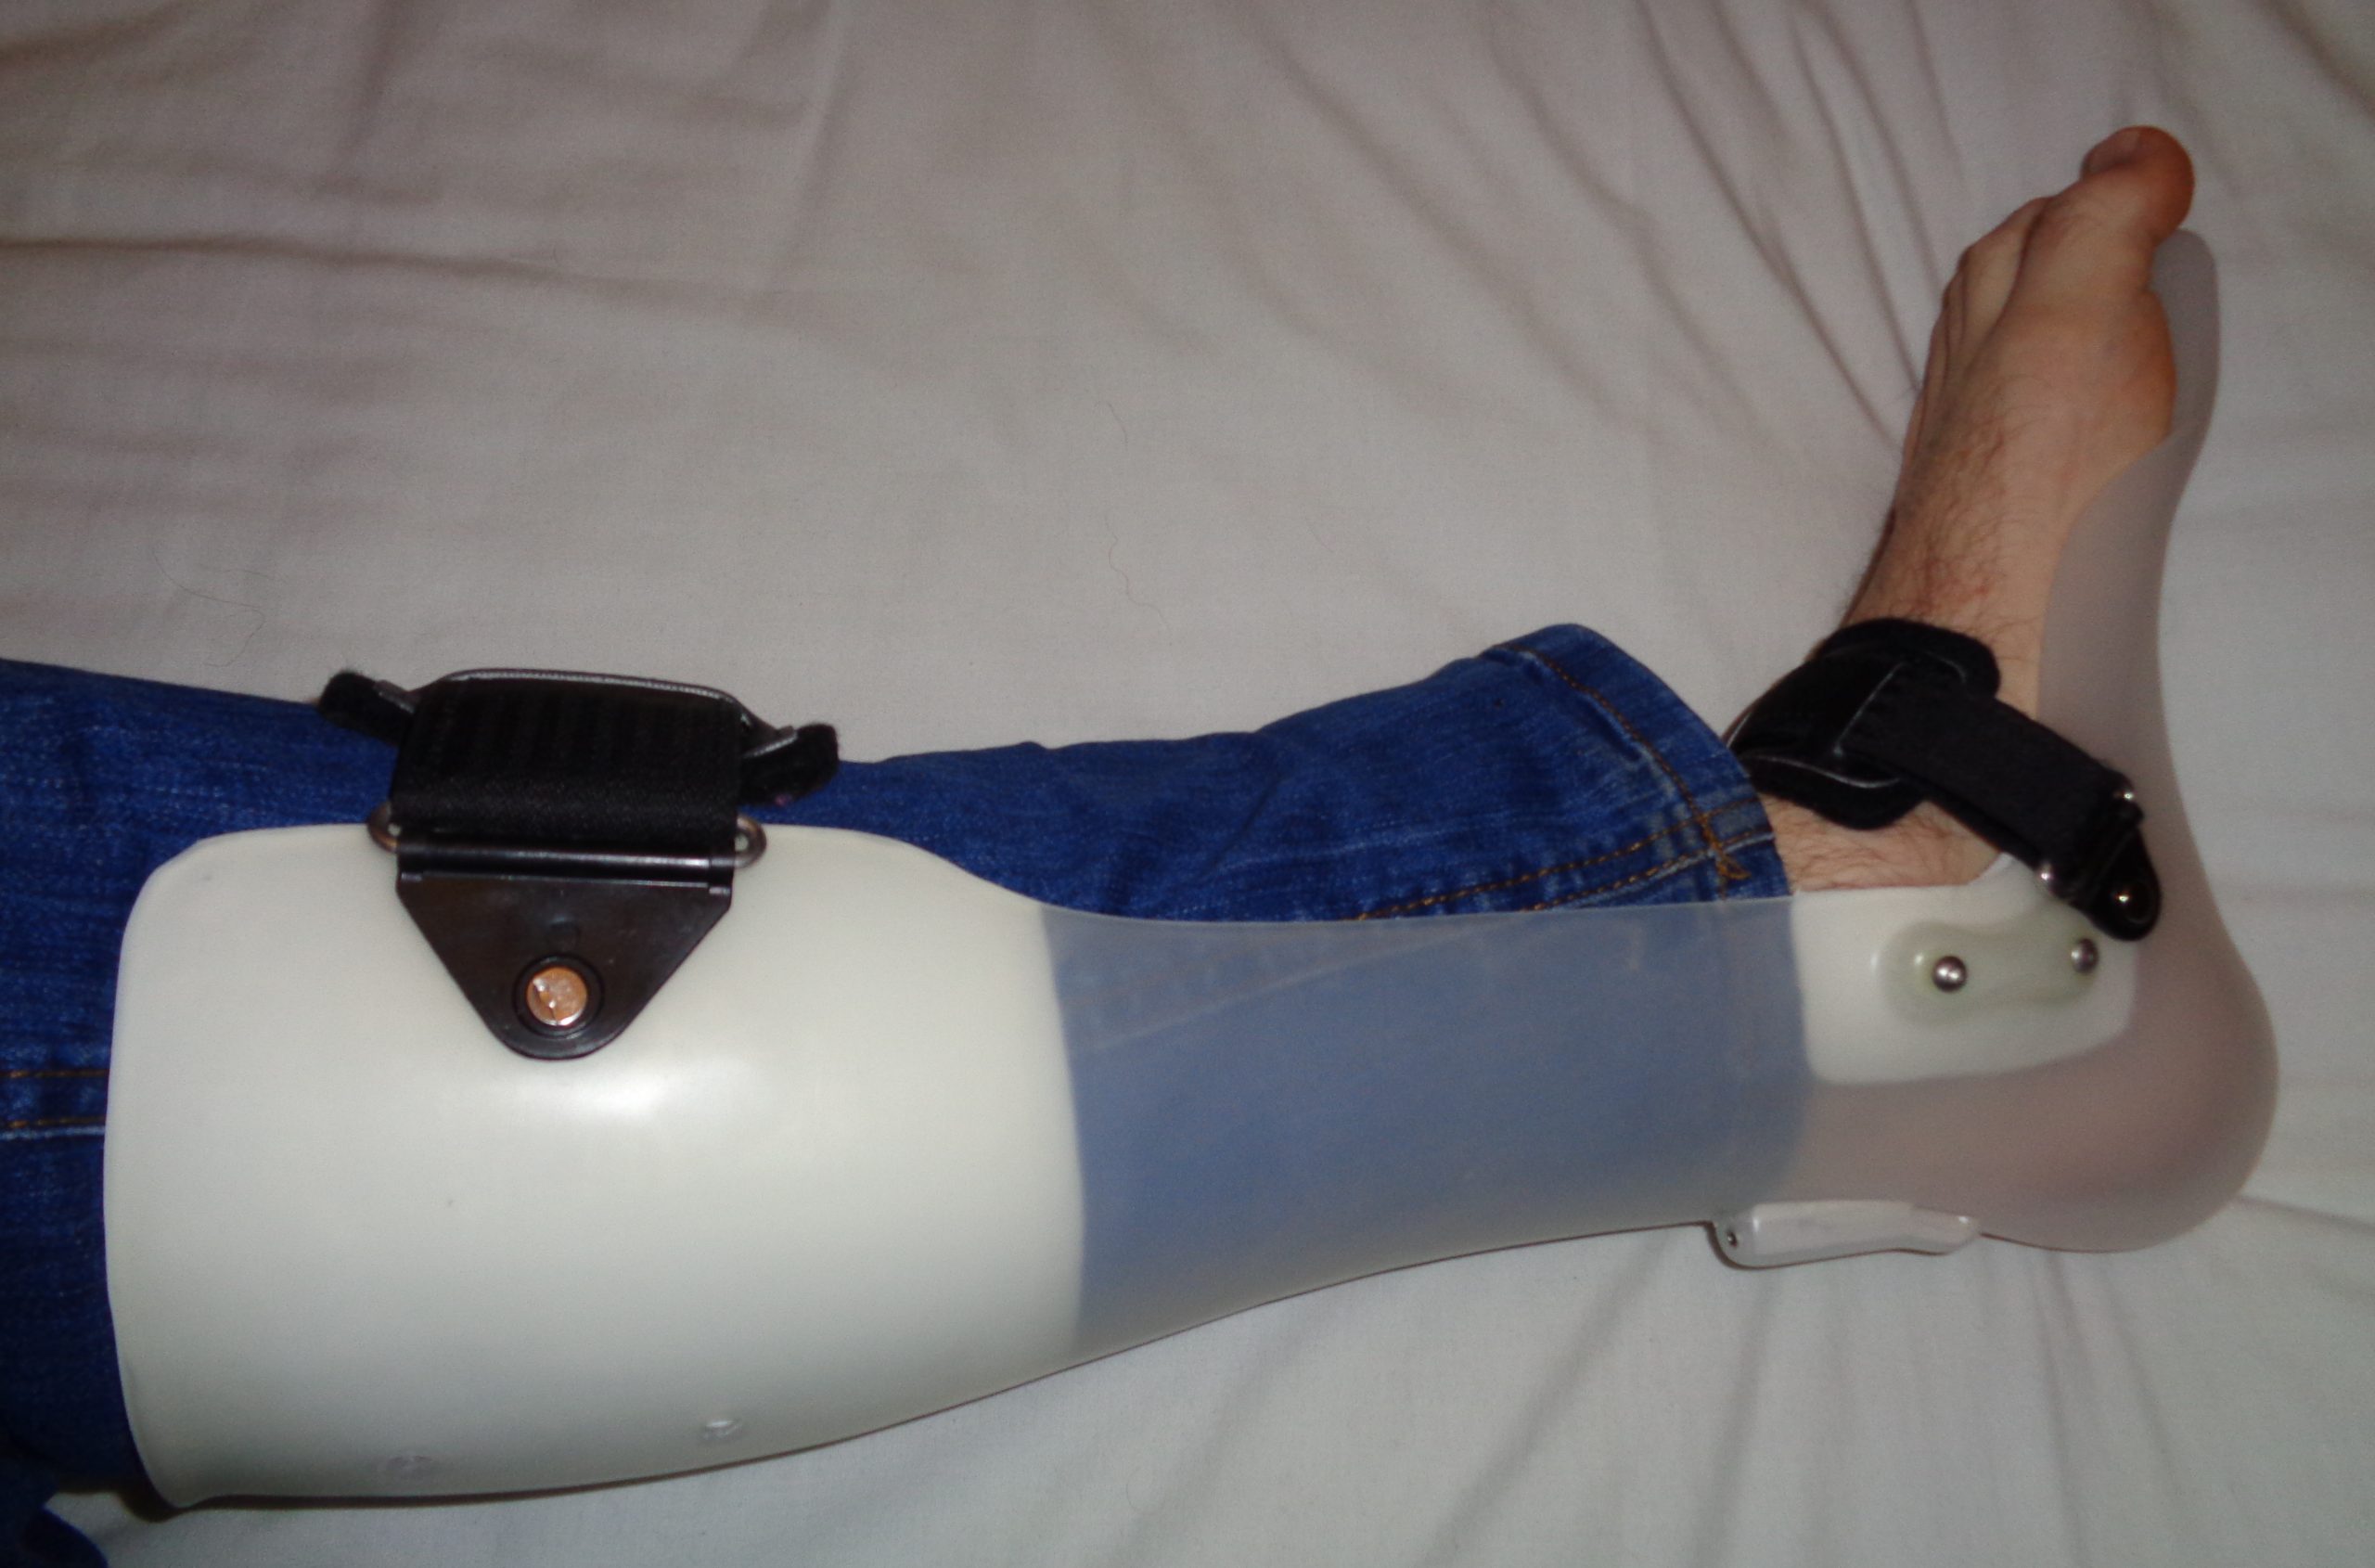 Photo showing brace being worn for foot drop